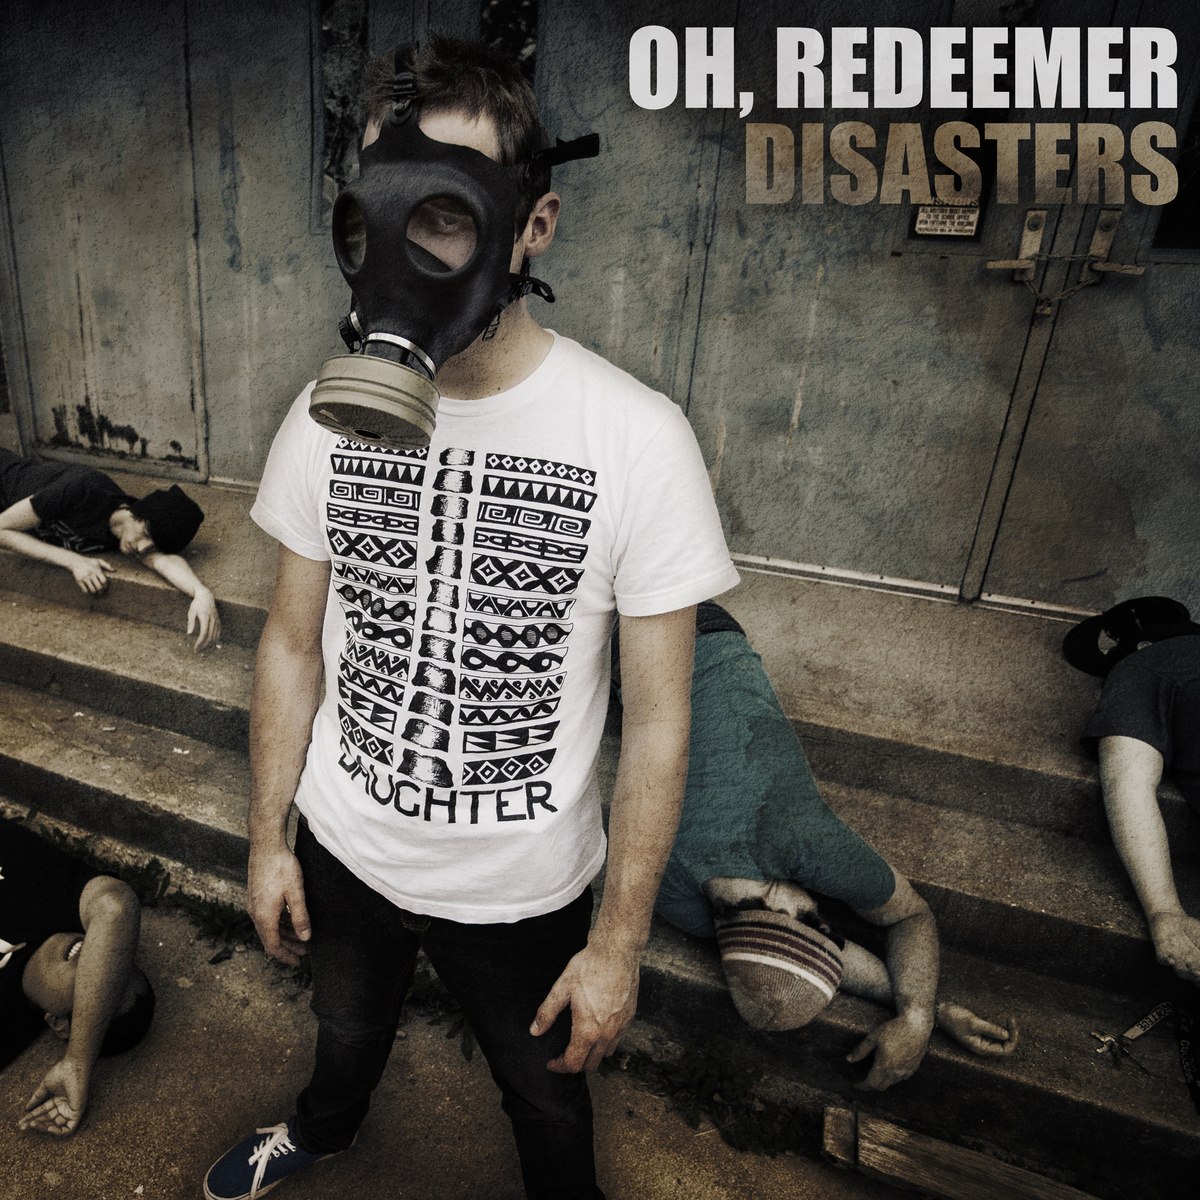 Oh, Redeemer - Disasters [EP] (2013)